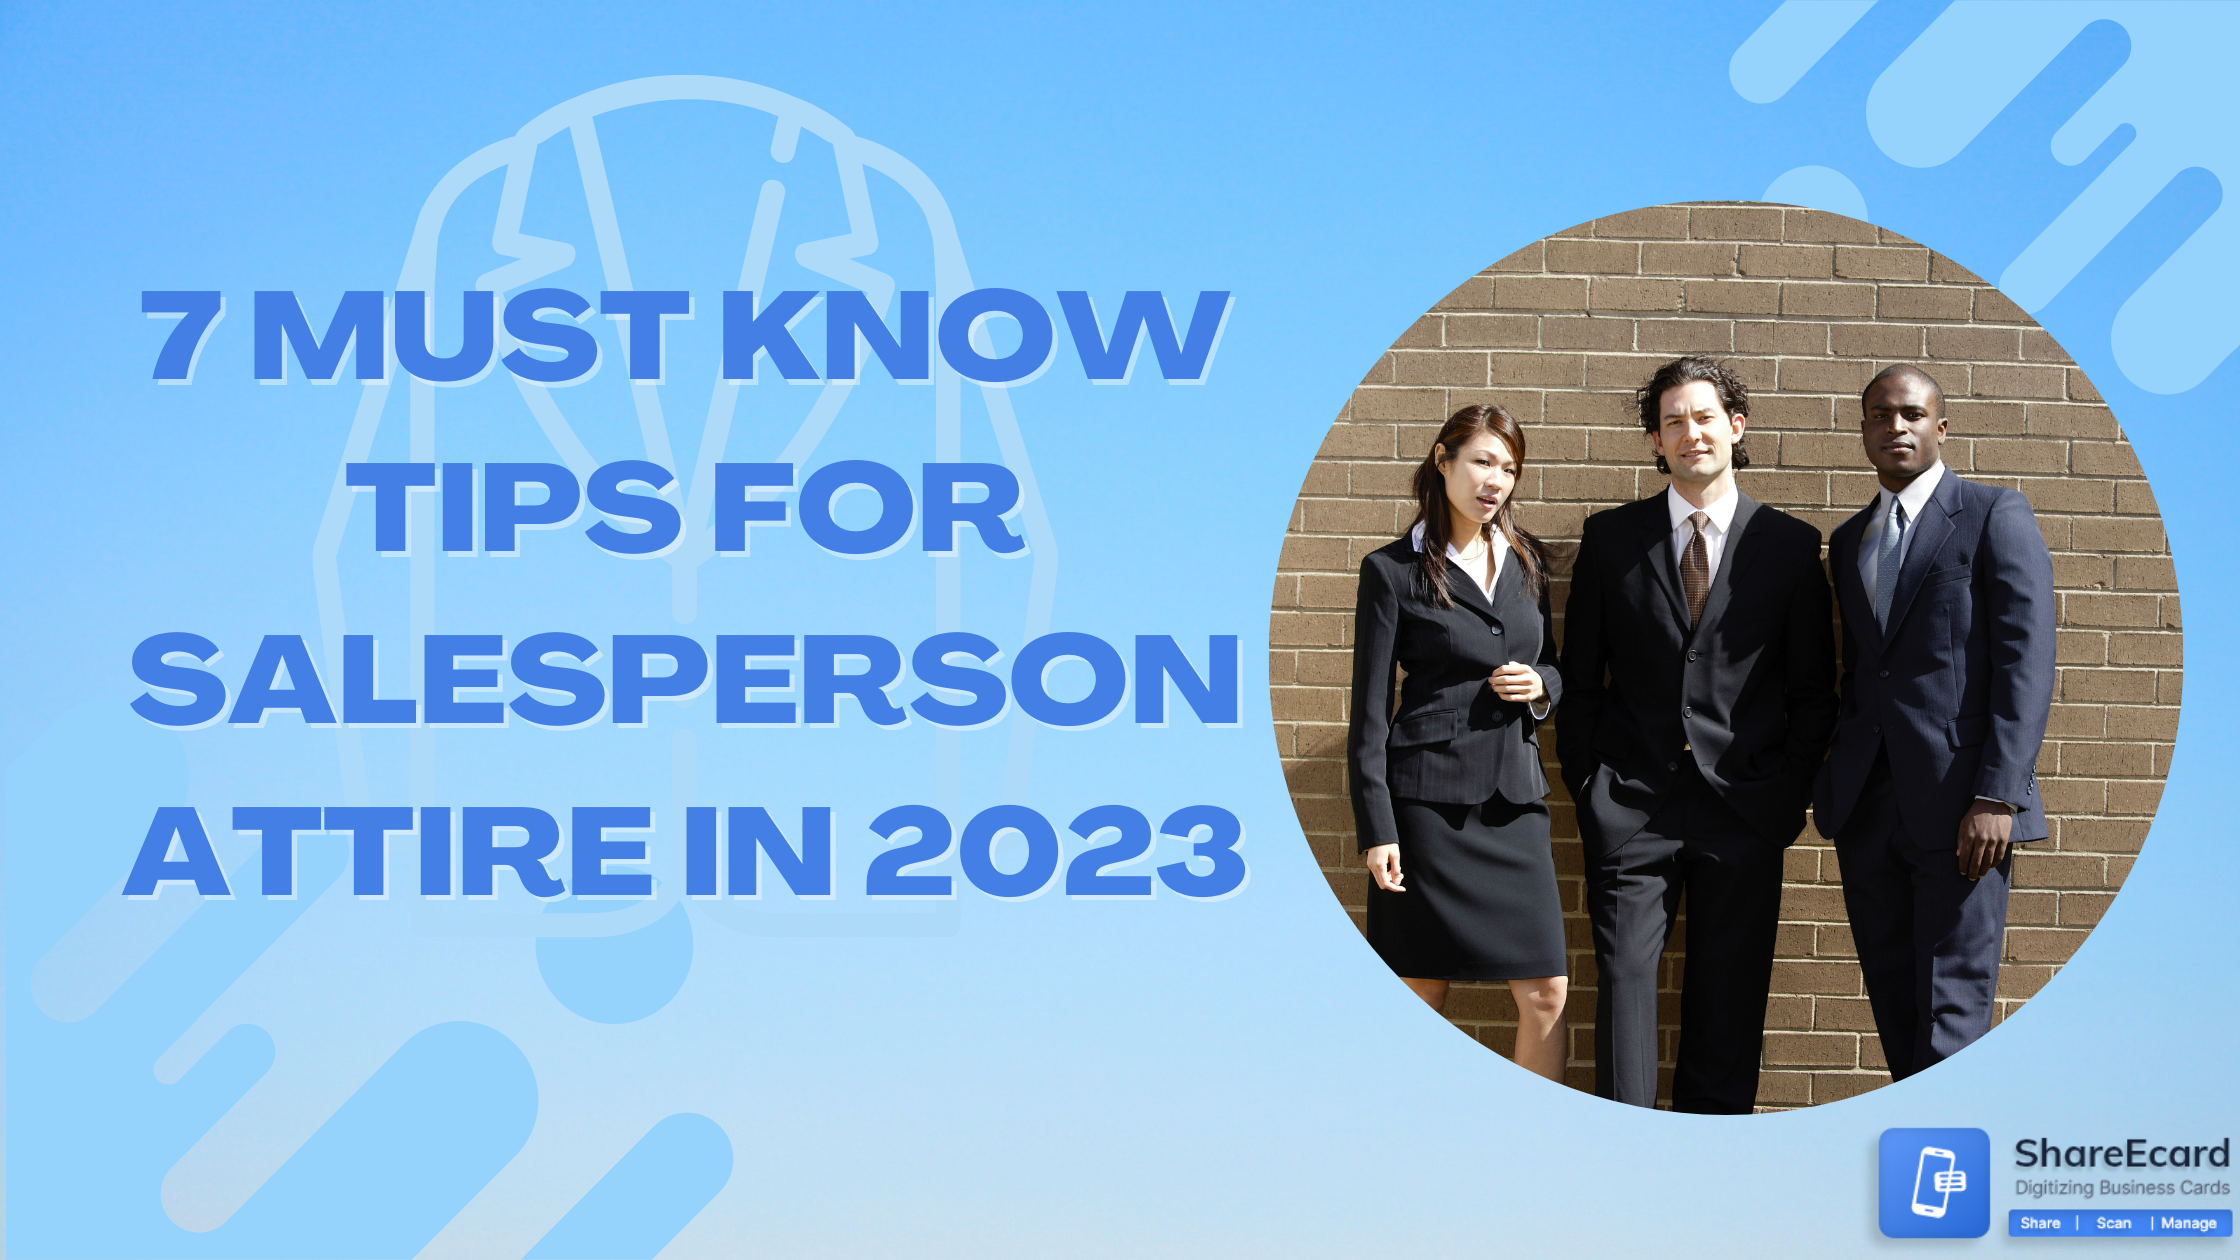 7 Must Know Tips for Salesperson Attire in 2023